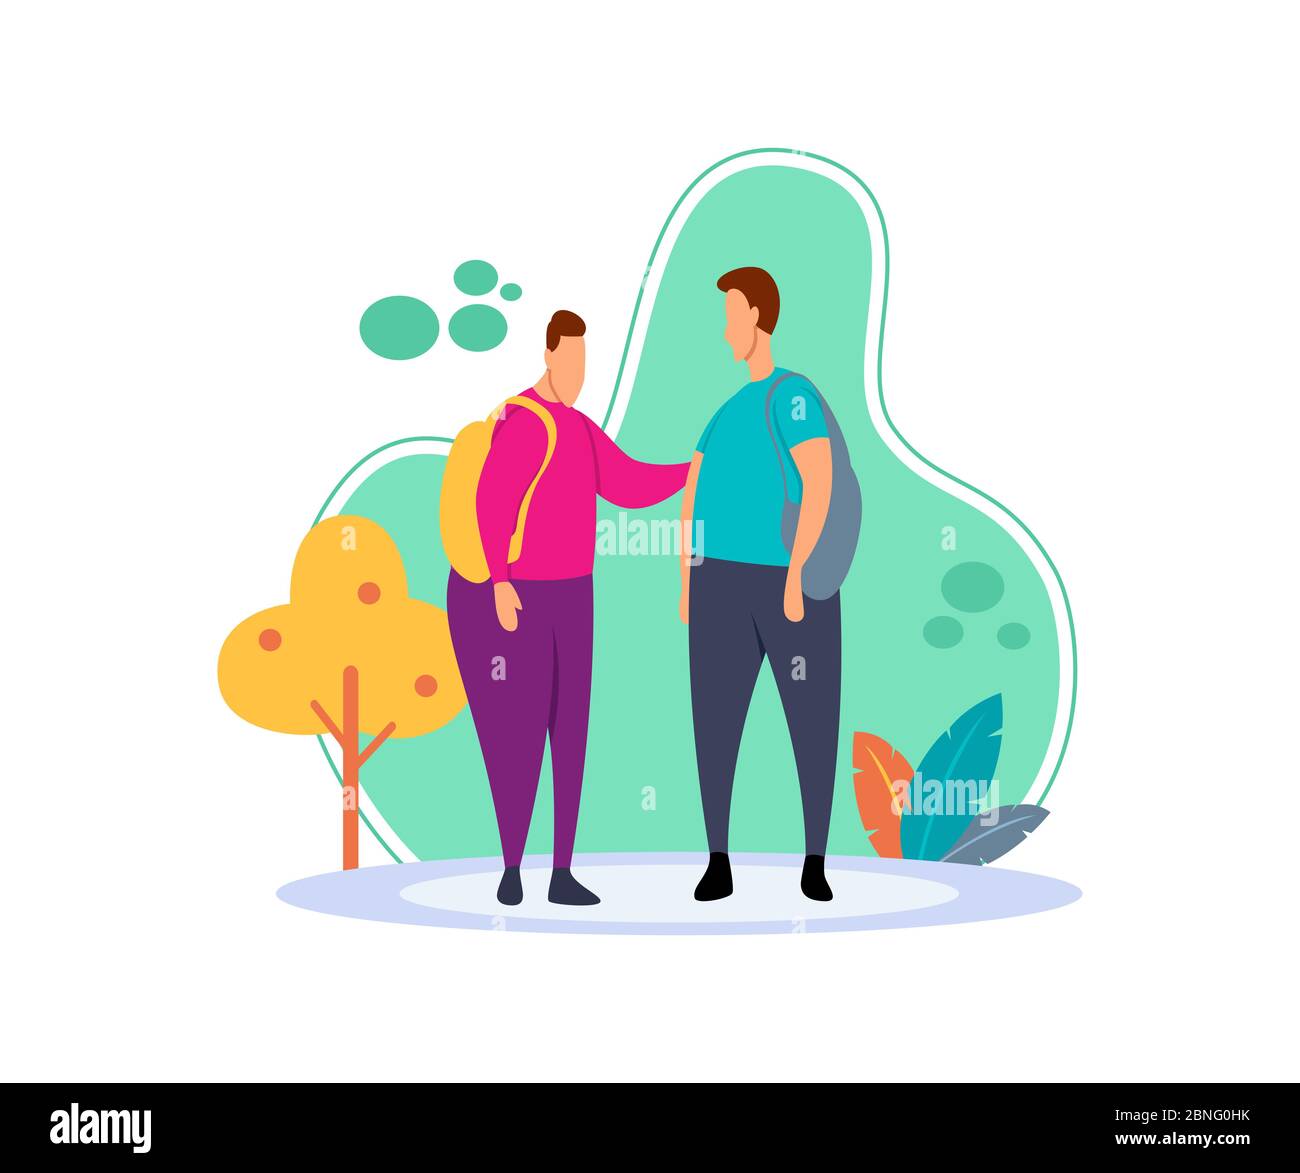 Flat illustration of two young boys standing and talking to each other carrying a backpack. Flat cartoon character with the concept of friendship Stock Vector